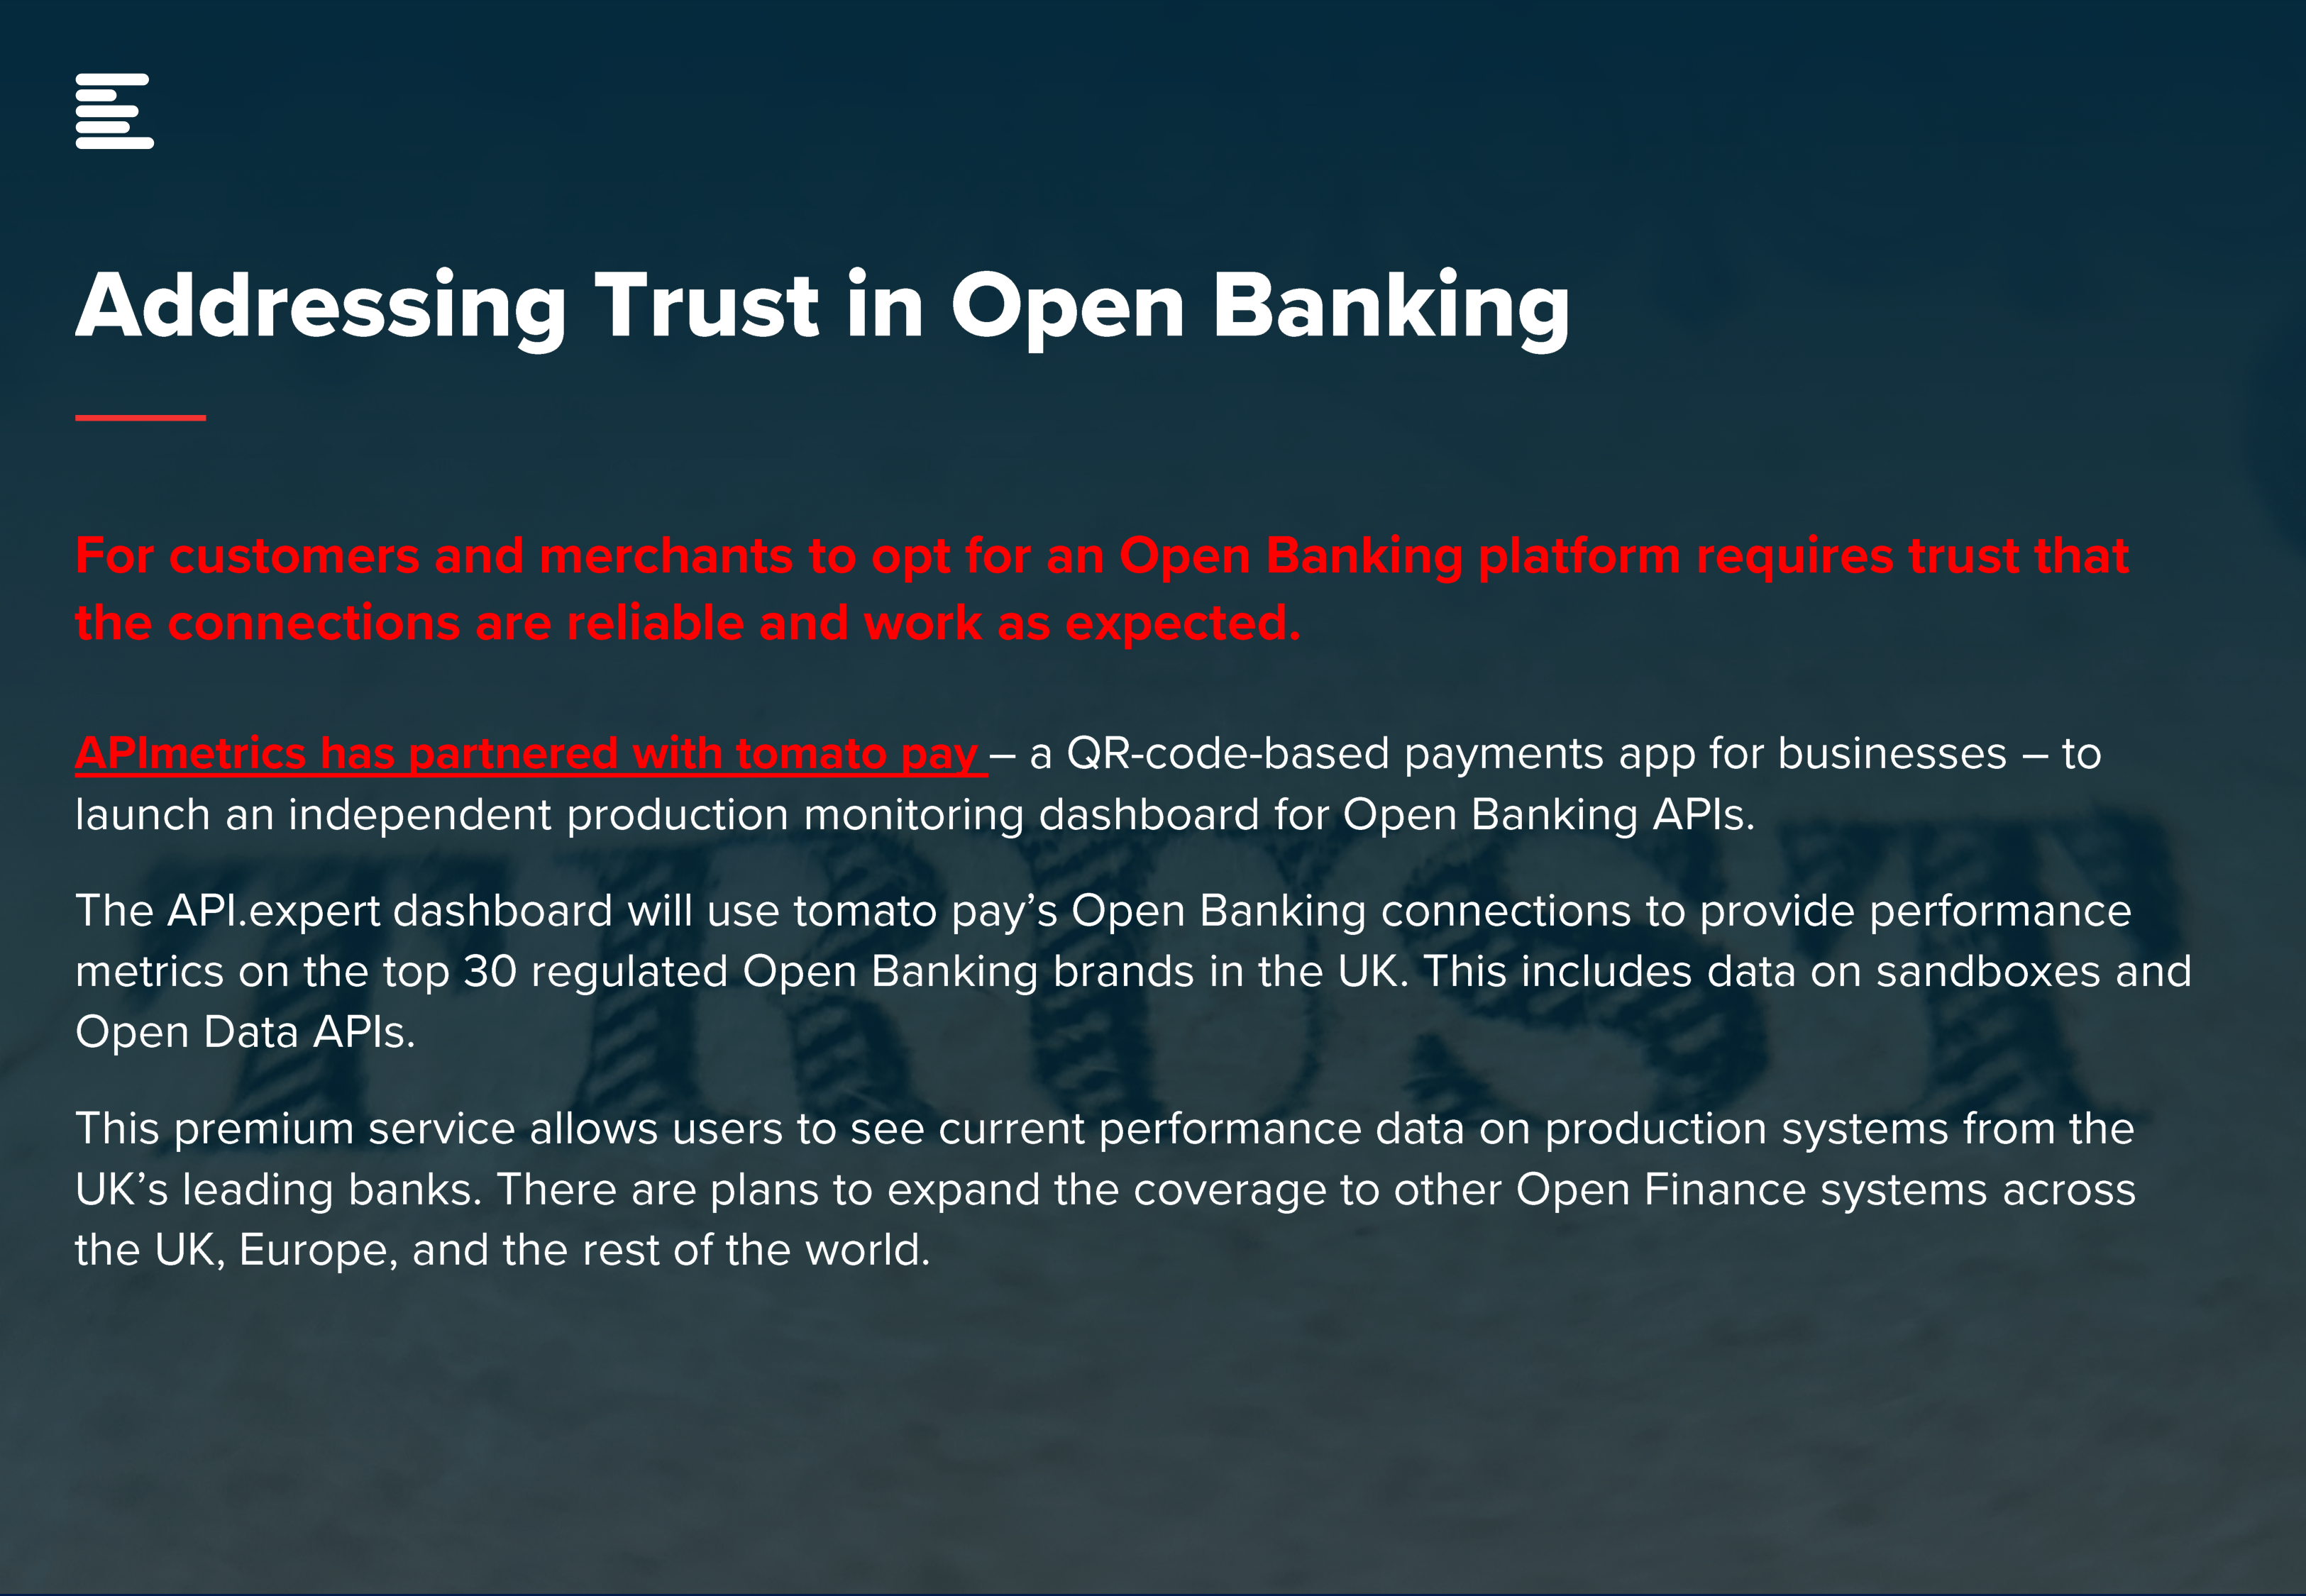 Global-Open-Banking-Trends-8